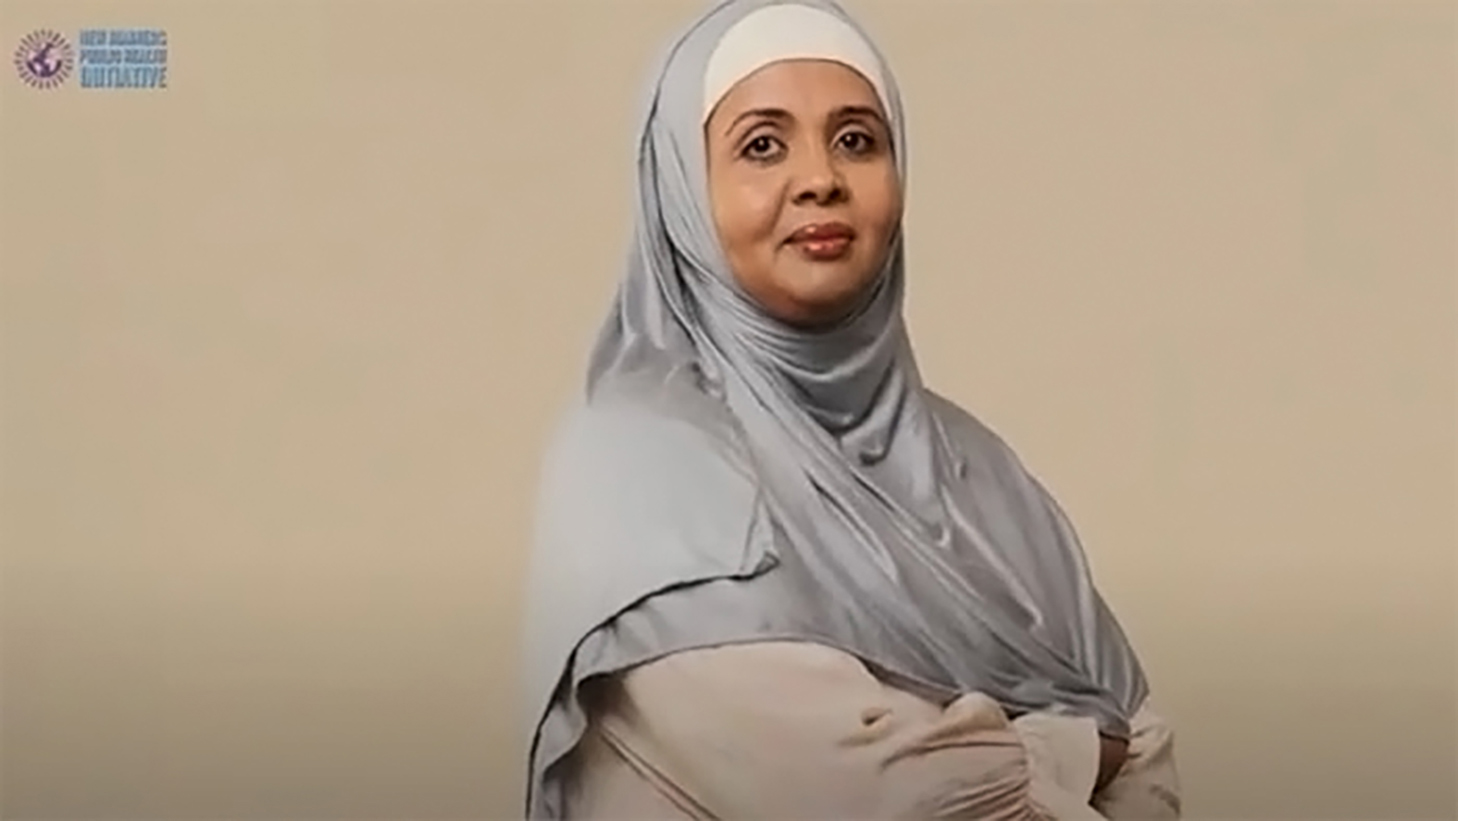 A Somali woman wearing a gray traditional head scarf with the New Mainers Public Health Initiative logo in the upper left corner.